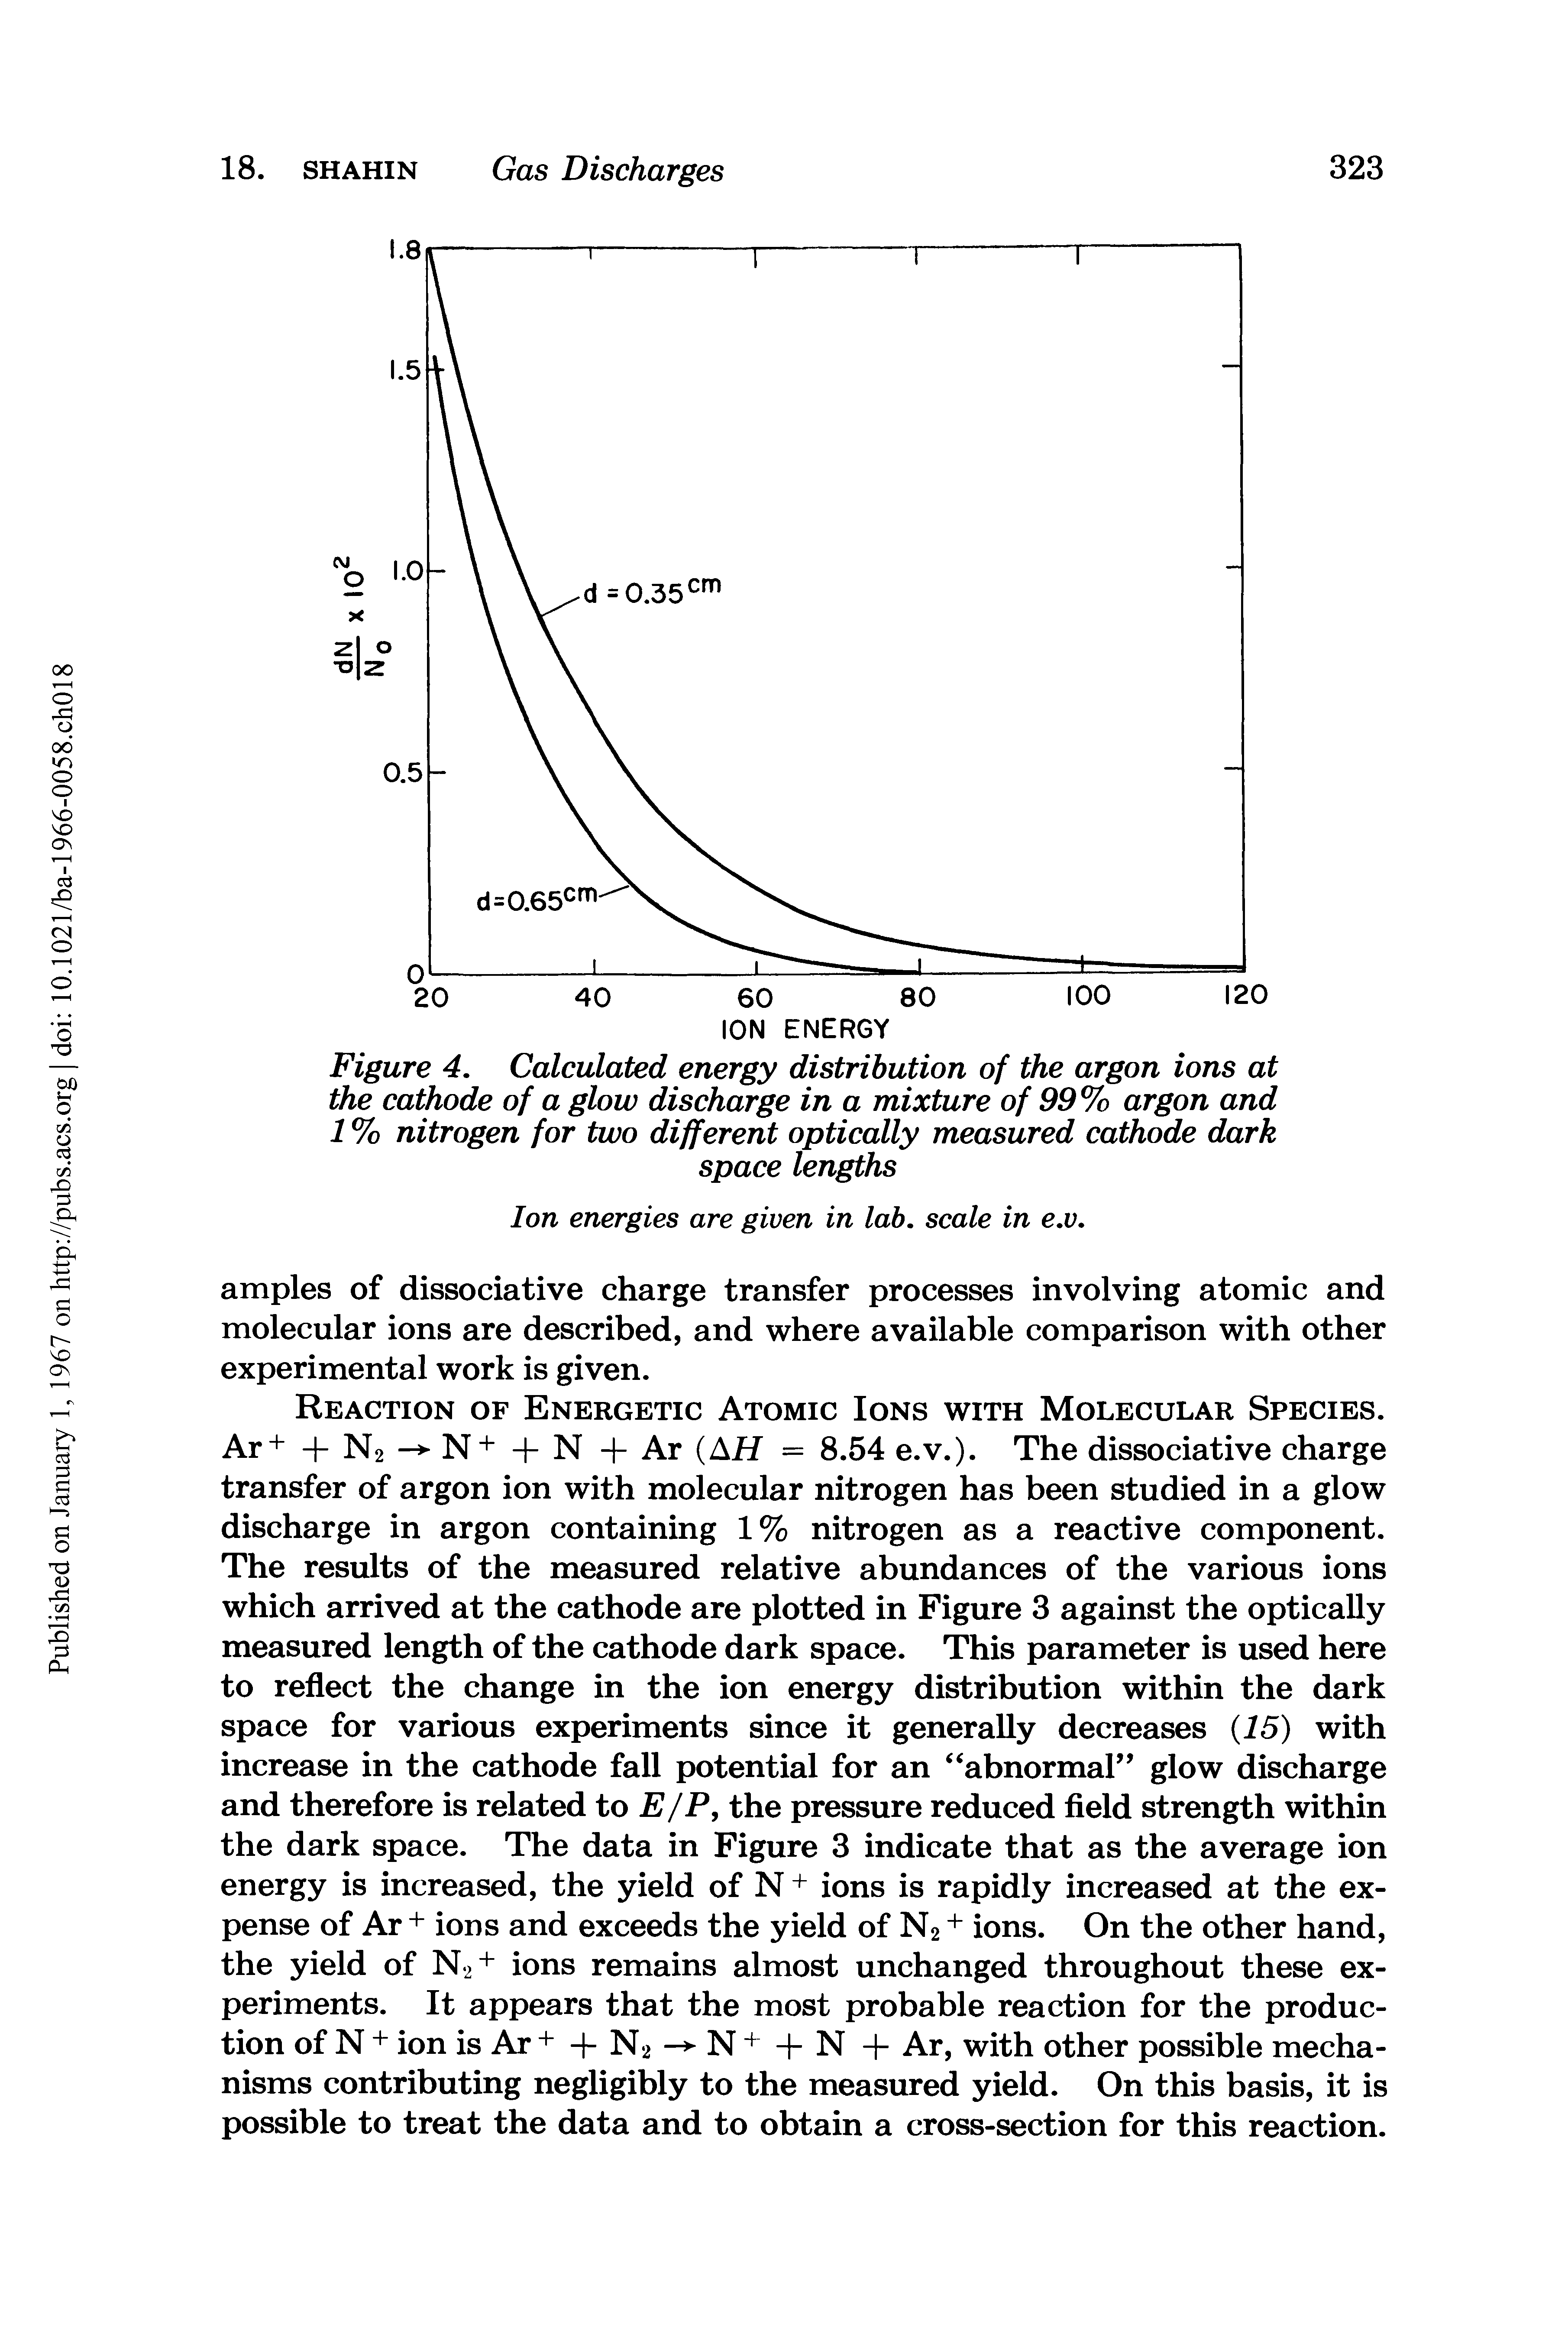 Figure 4. Calculated energy distribution of the argon ions at the cathode of a glow discharge in a mixture of 99% argon and 1 % nitrogen for two different optically measured cathode dark space lengths...